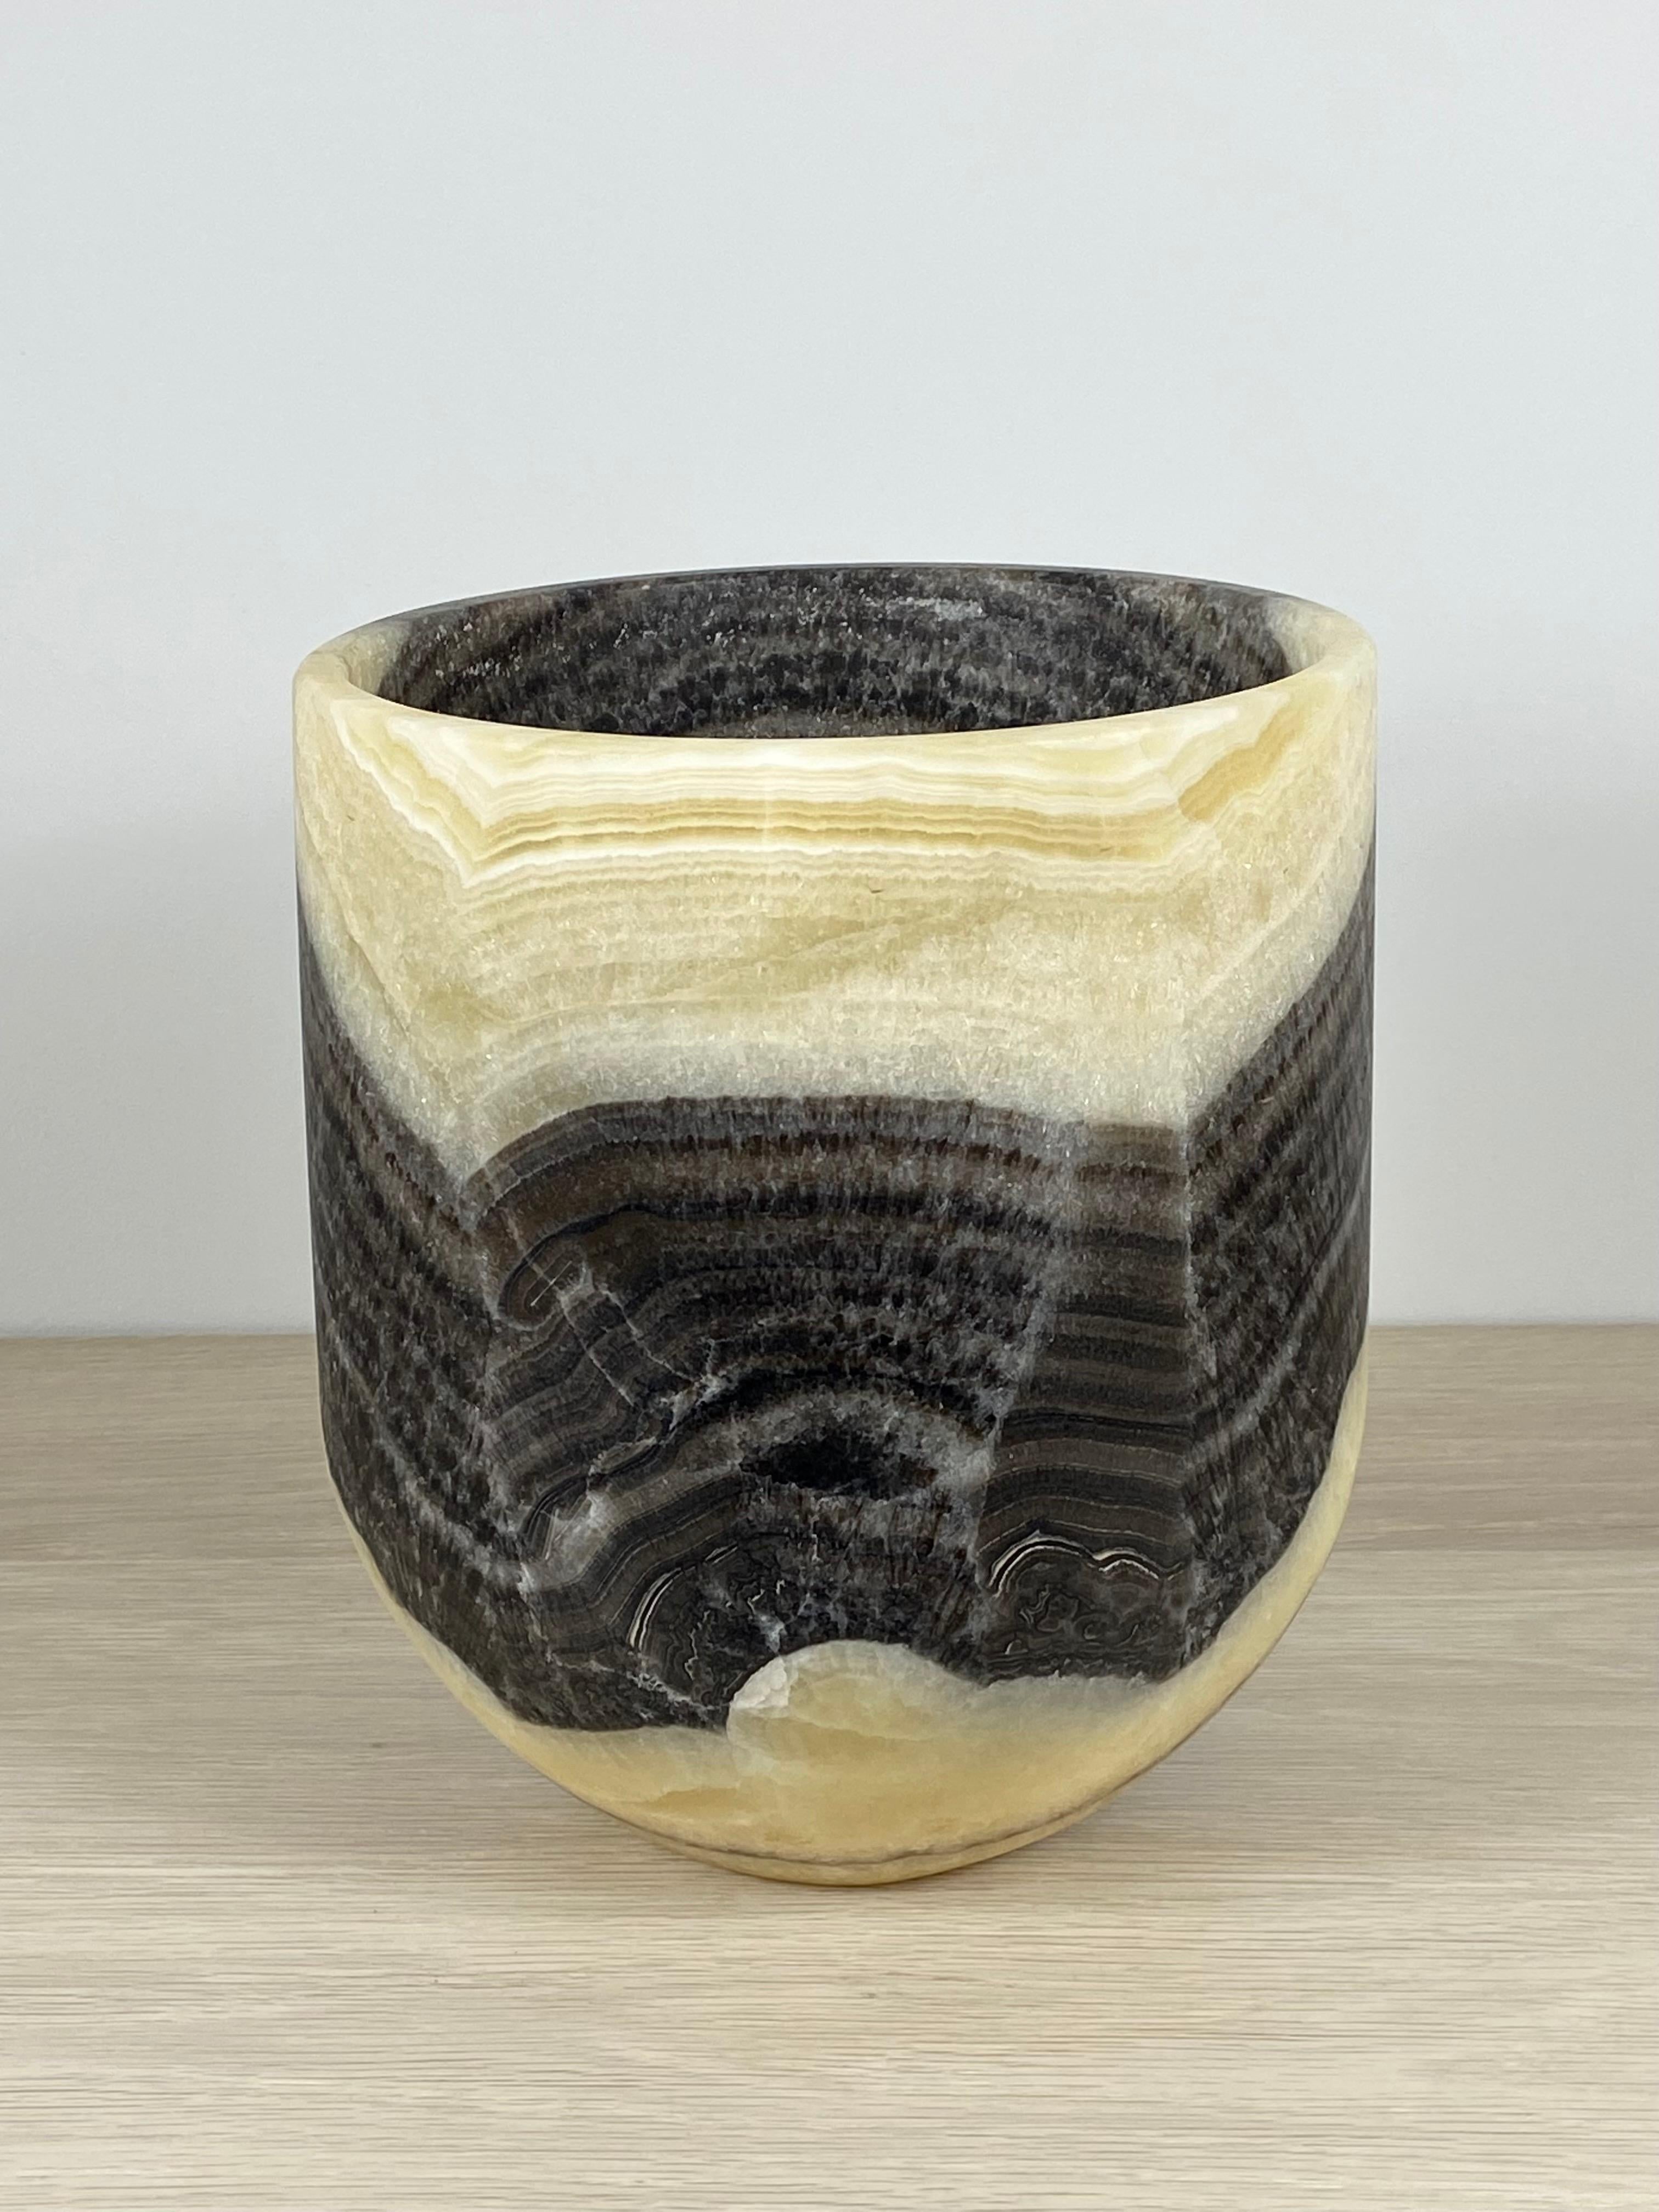 An unusual striped onyx planter. This one of a kind planter is meticulously hand-carved from a single piece of raw stone by skilled artists to reveal its' inherent characteristics. The striations are formations formed over thousands of years. This